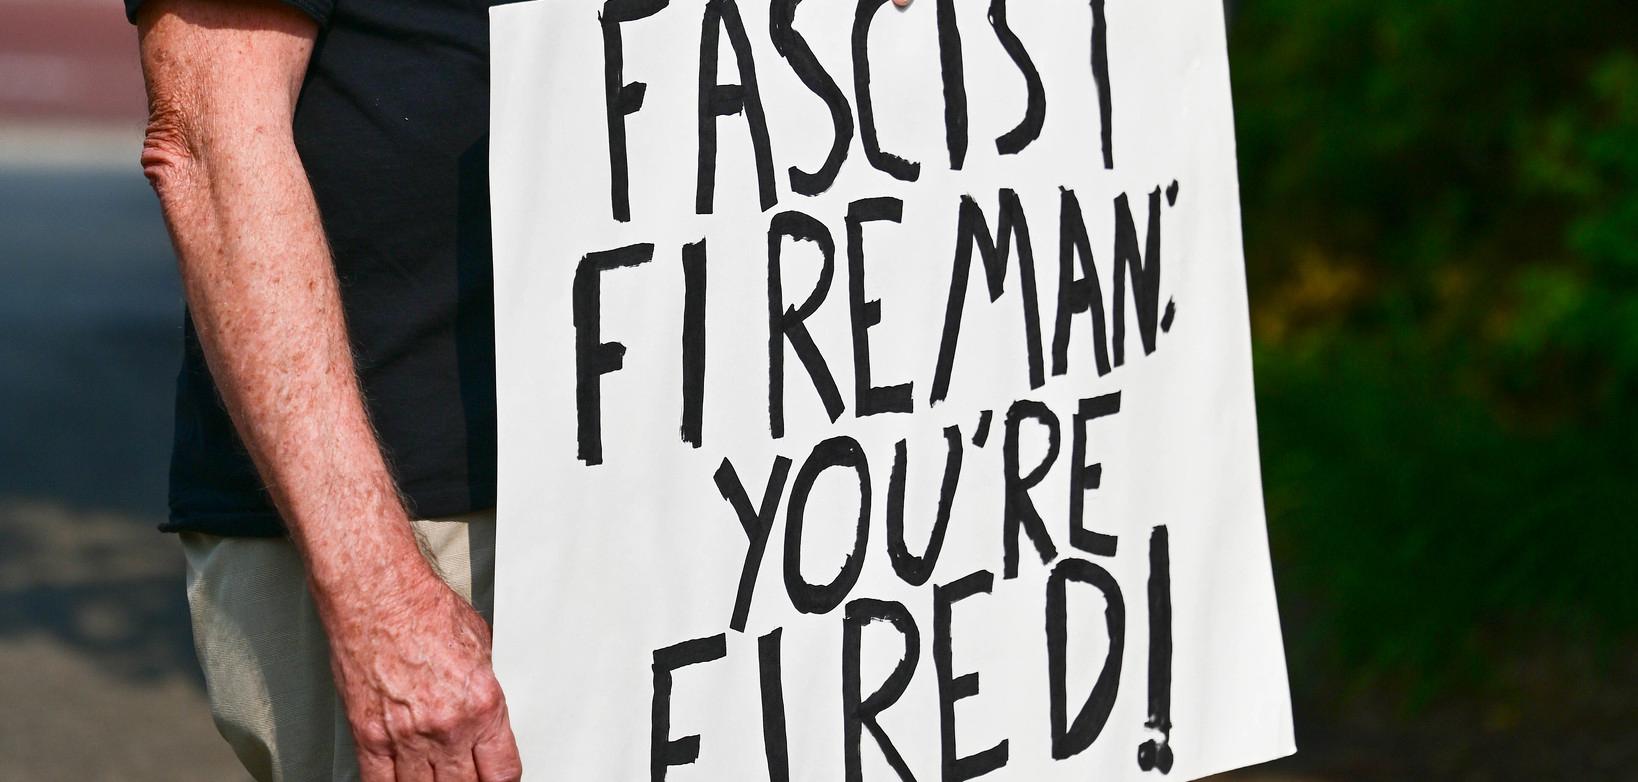 a sign that says "Fascist Fireman: You're Fired!"